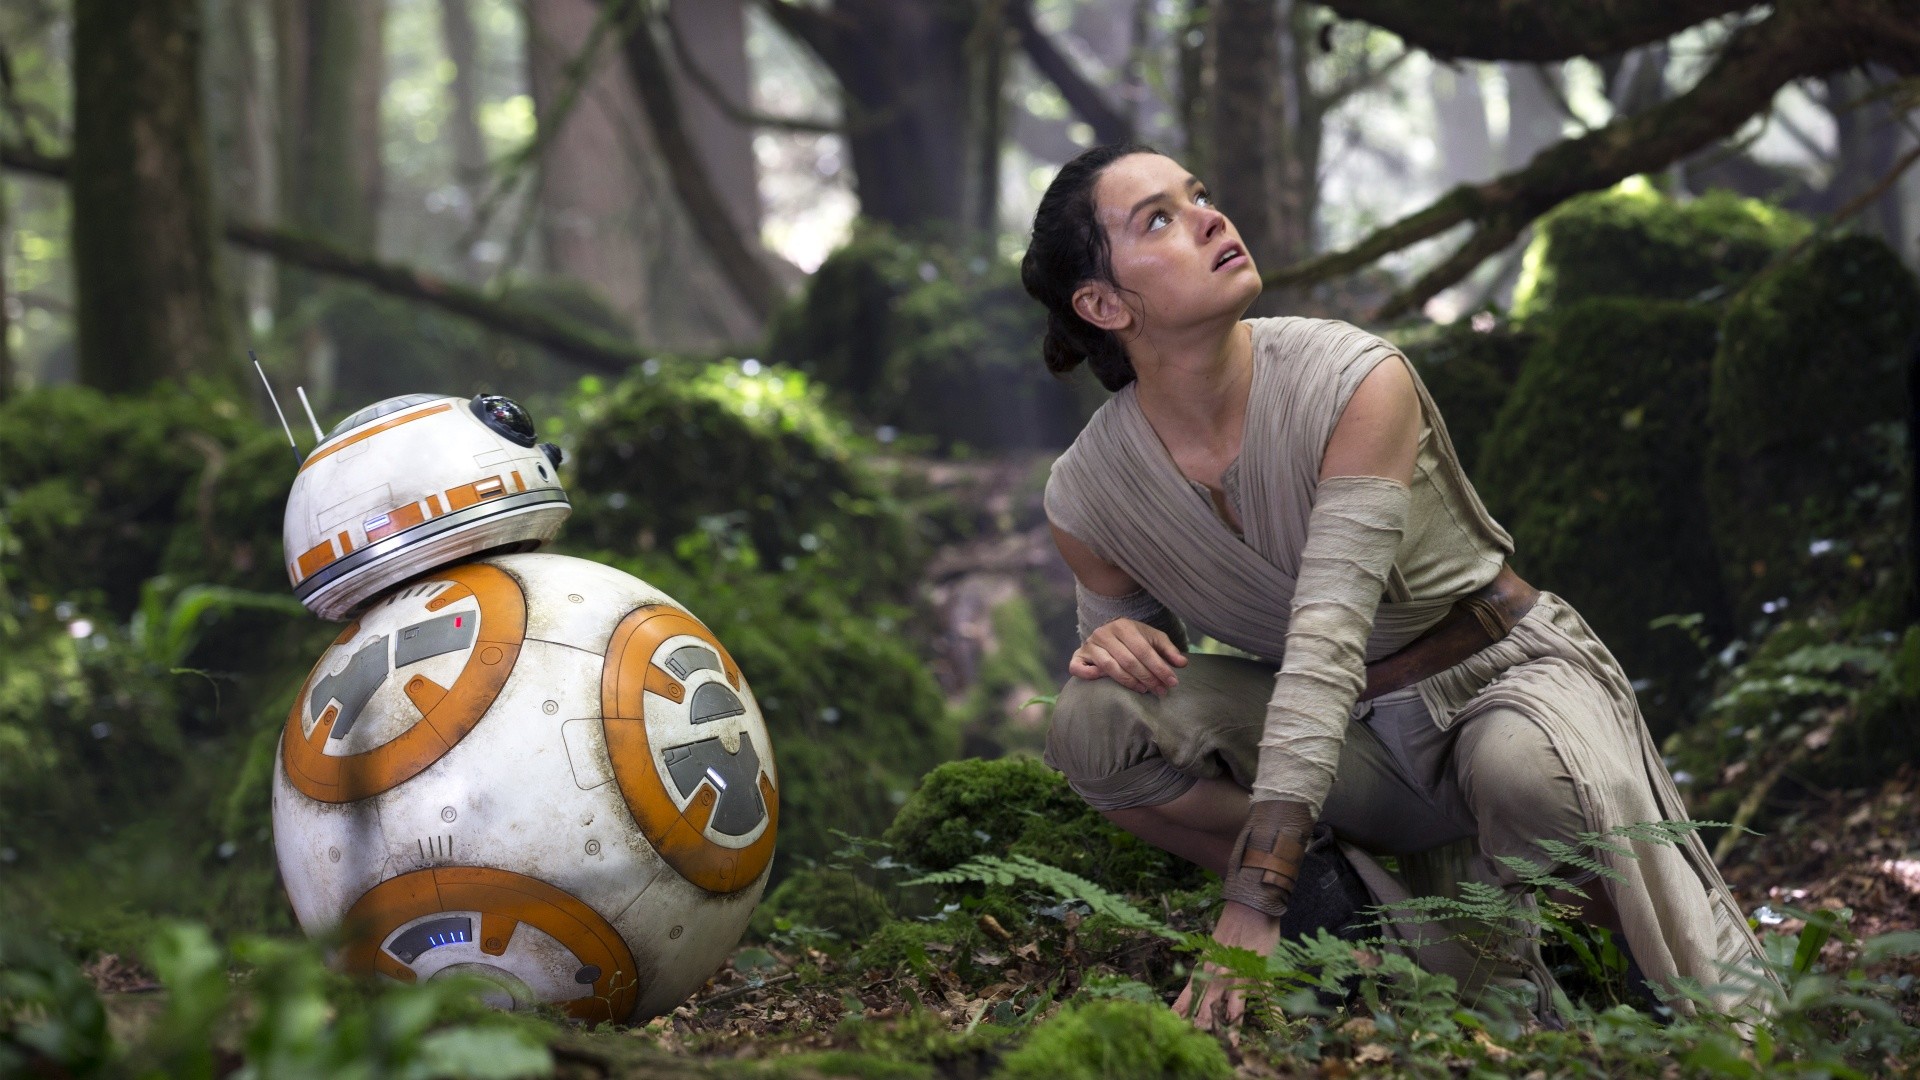 1920x1080 Star Wars The Force Awakens R2 D2 Rey Wallpapers